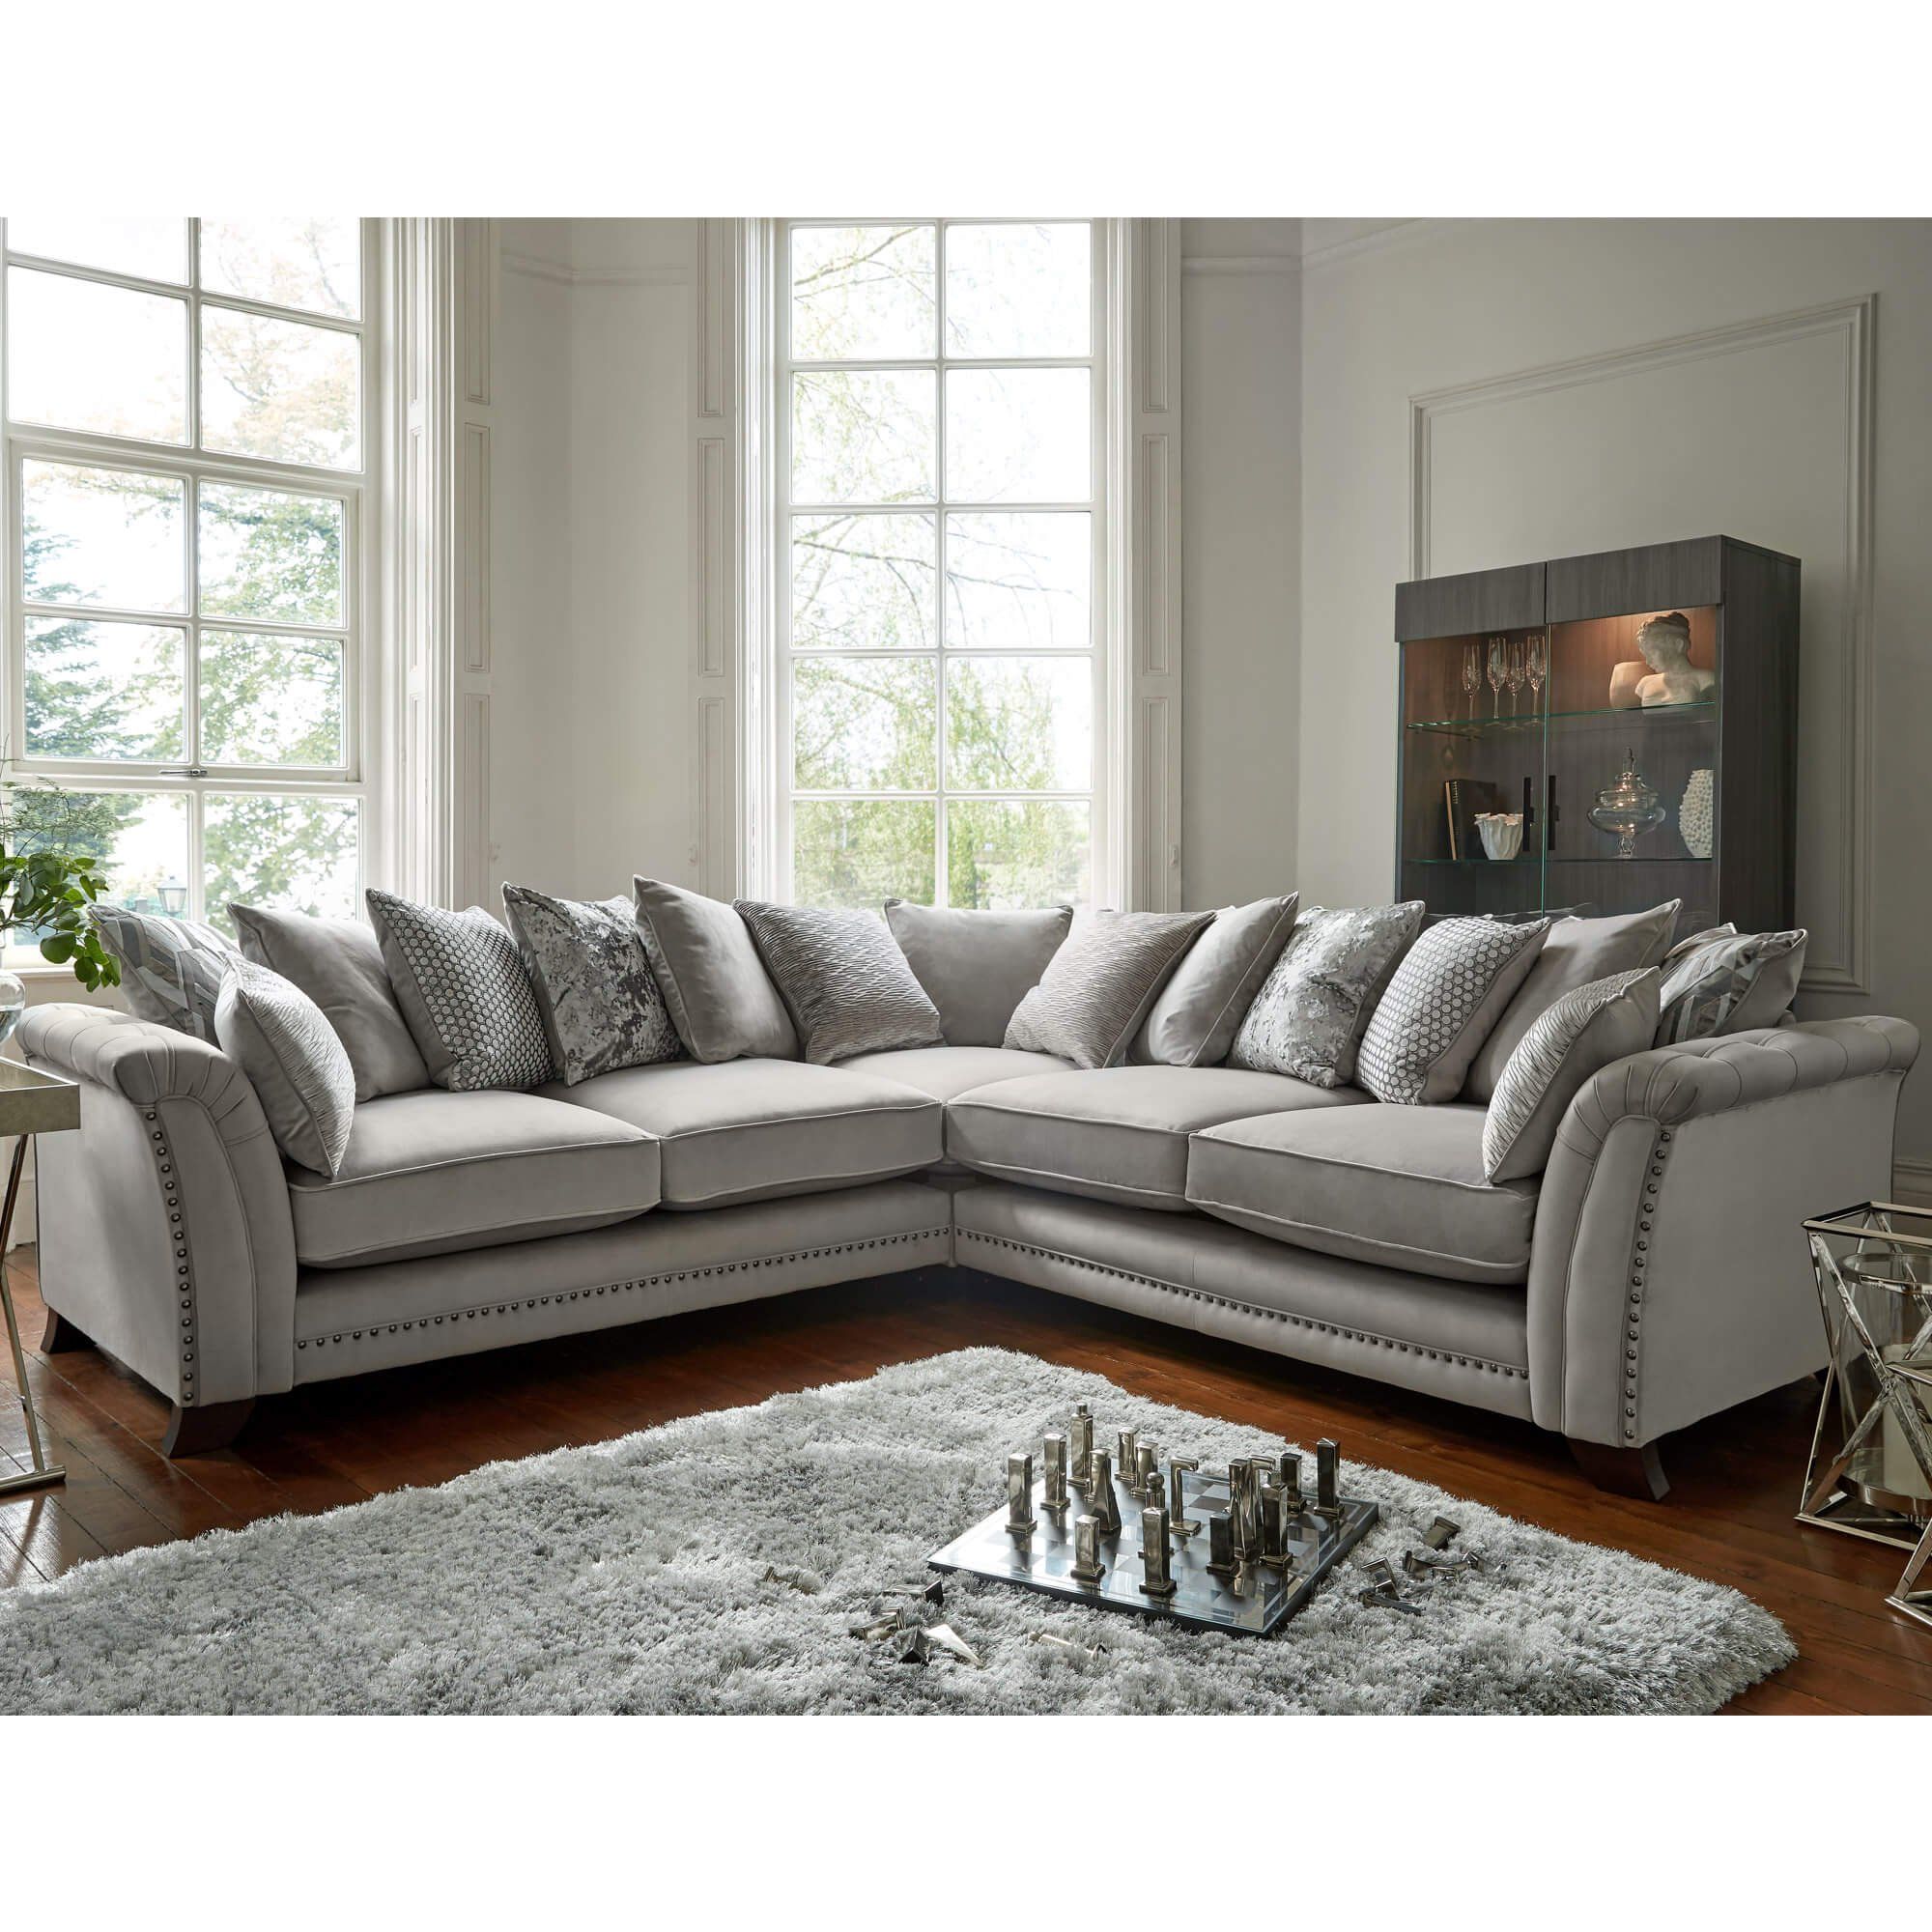 Fairfield Silver Velvet Pillow Back Sofa Collection Inside Pillowback Sofa Sectionals (View 14 of 20)